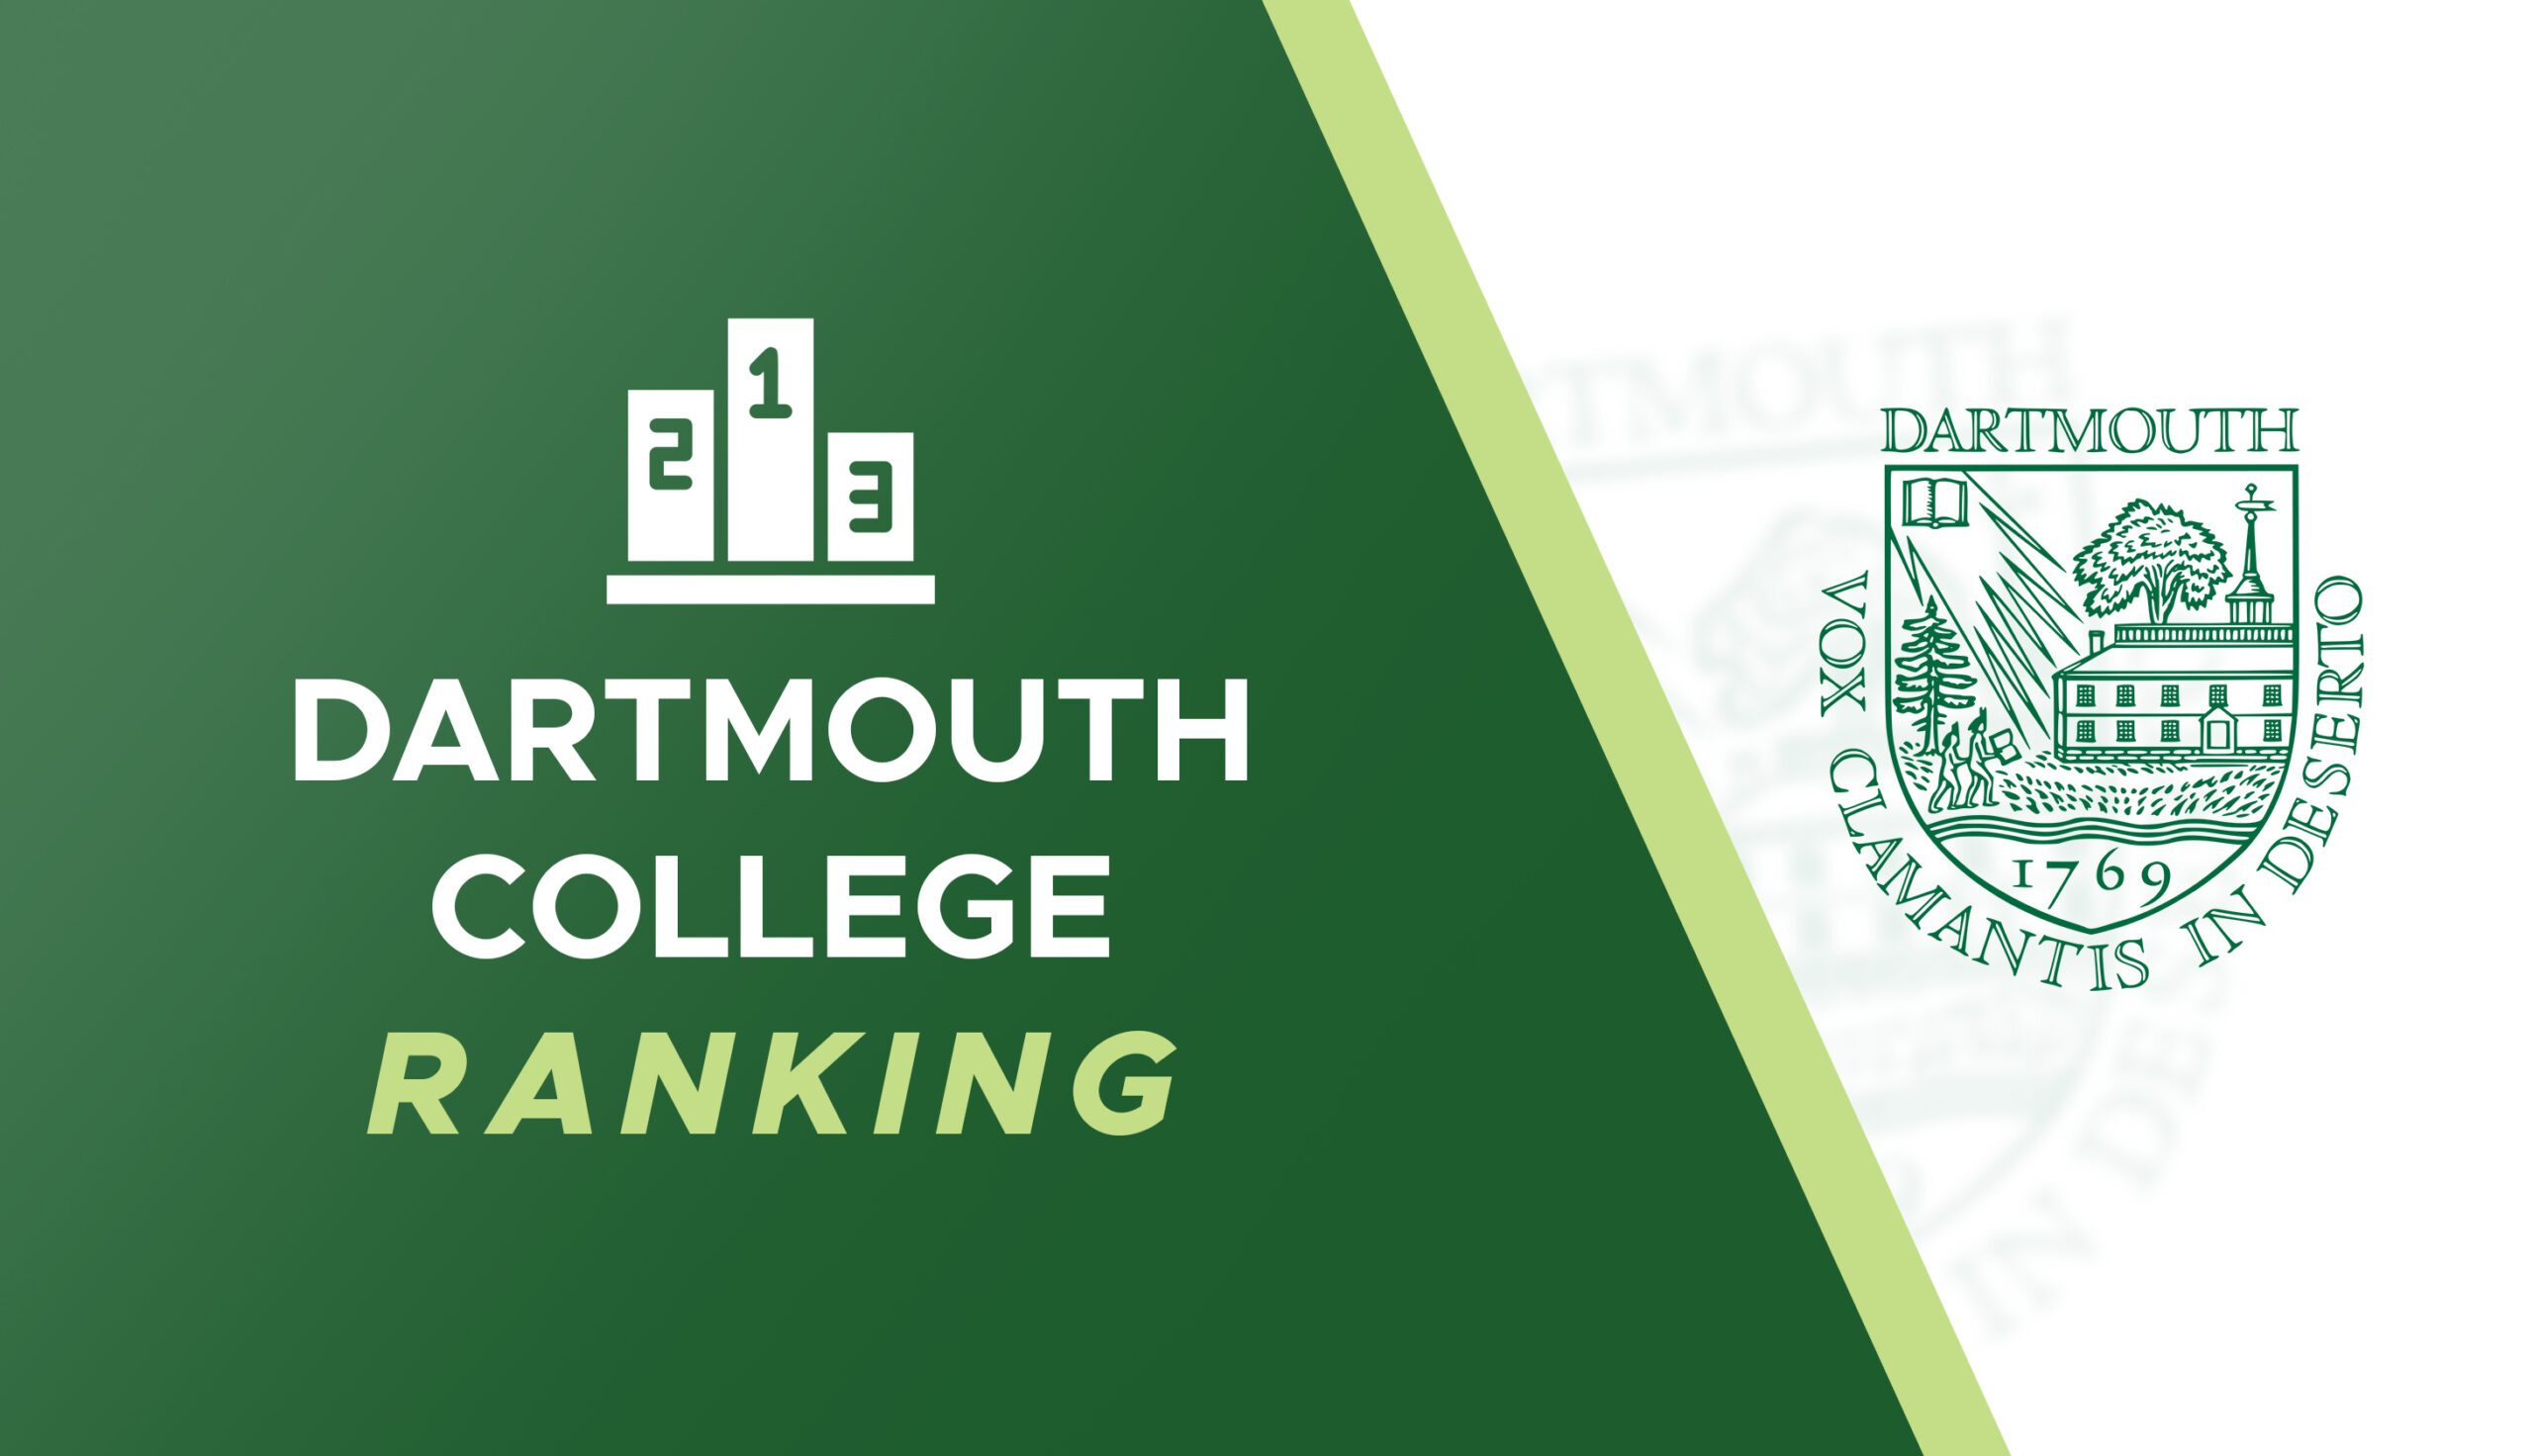 Dartmouth Ranking And Dartmouth College Ranking Expert Guide